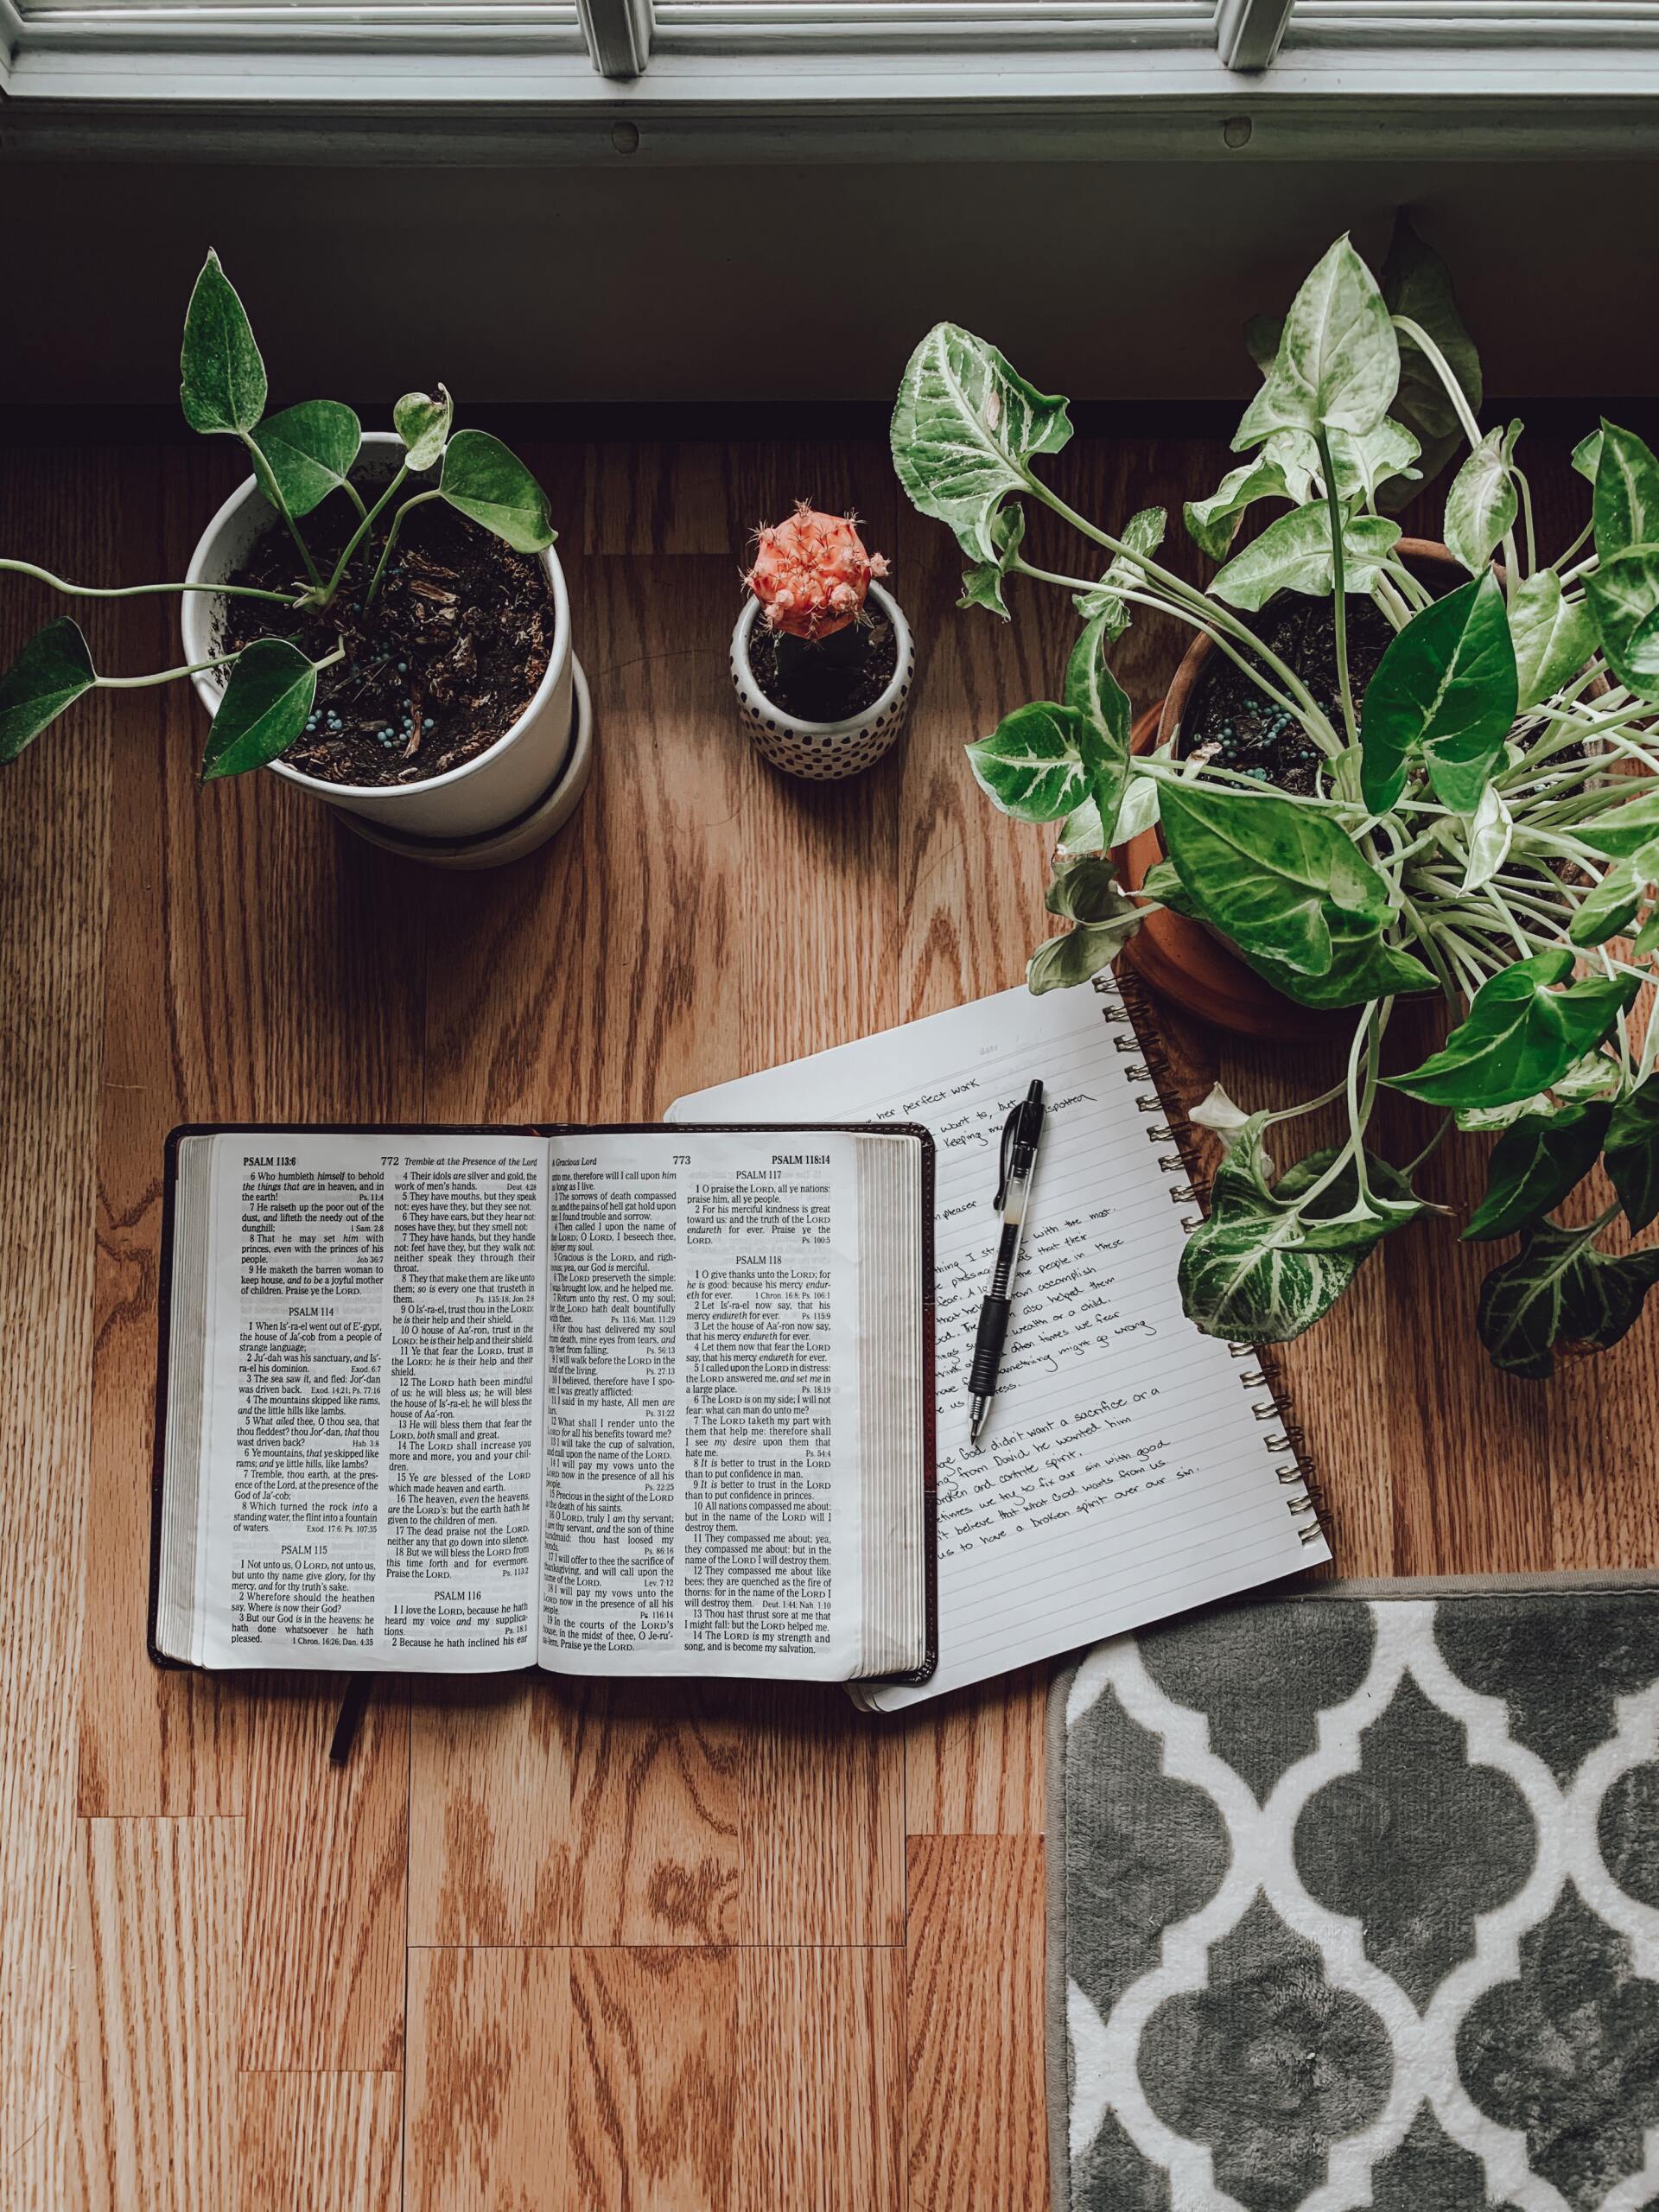 Open Bible and notebook with notes for Bible study, surrounded by plants